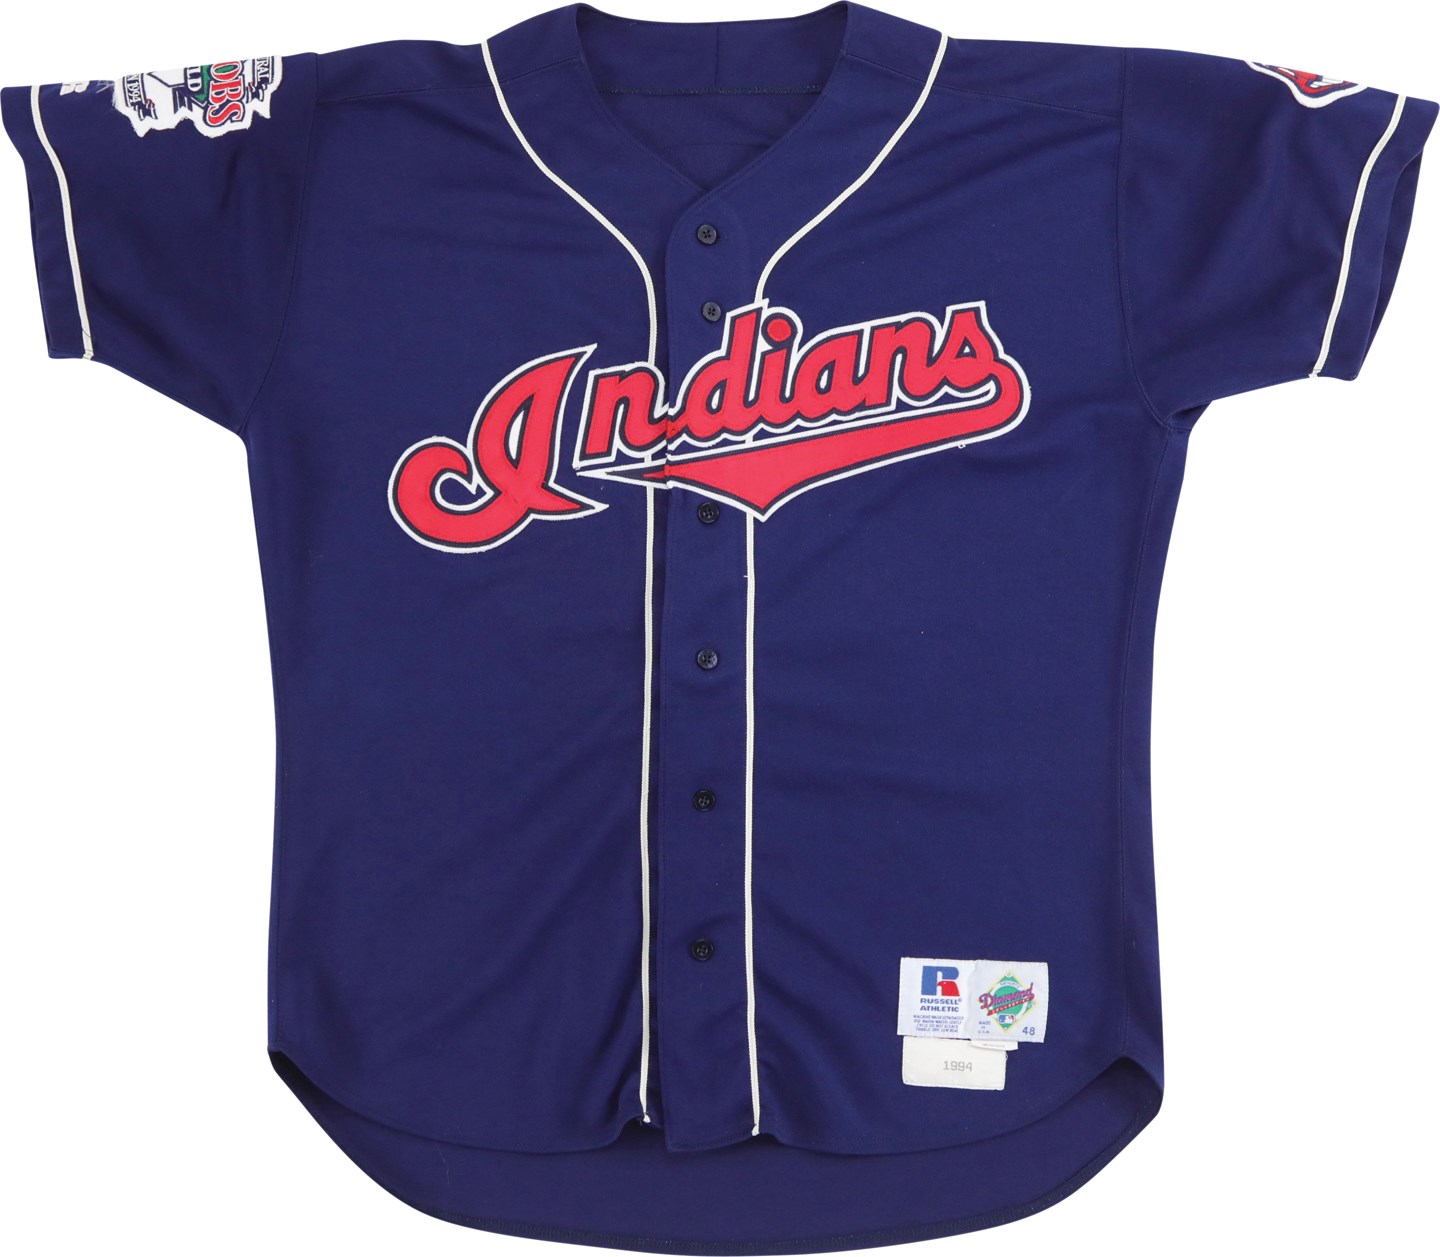 Baseball Equipment - 1994 Eddie Murray Career Hits #2,868 and #2,869 Cleveland Indians Game Worn Jersey (Photo-Matched to Three Games)